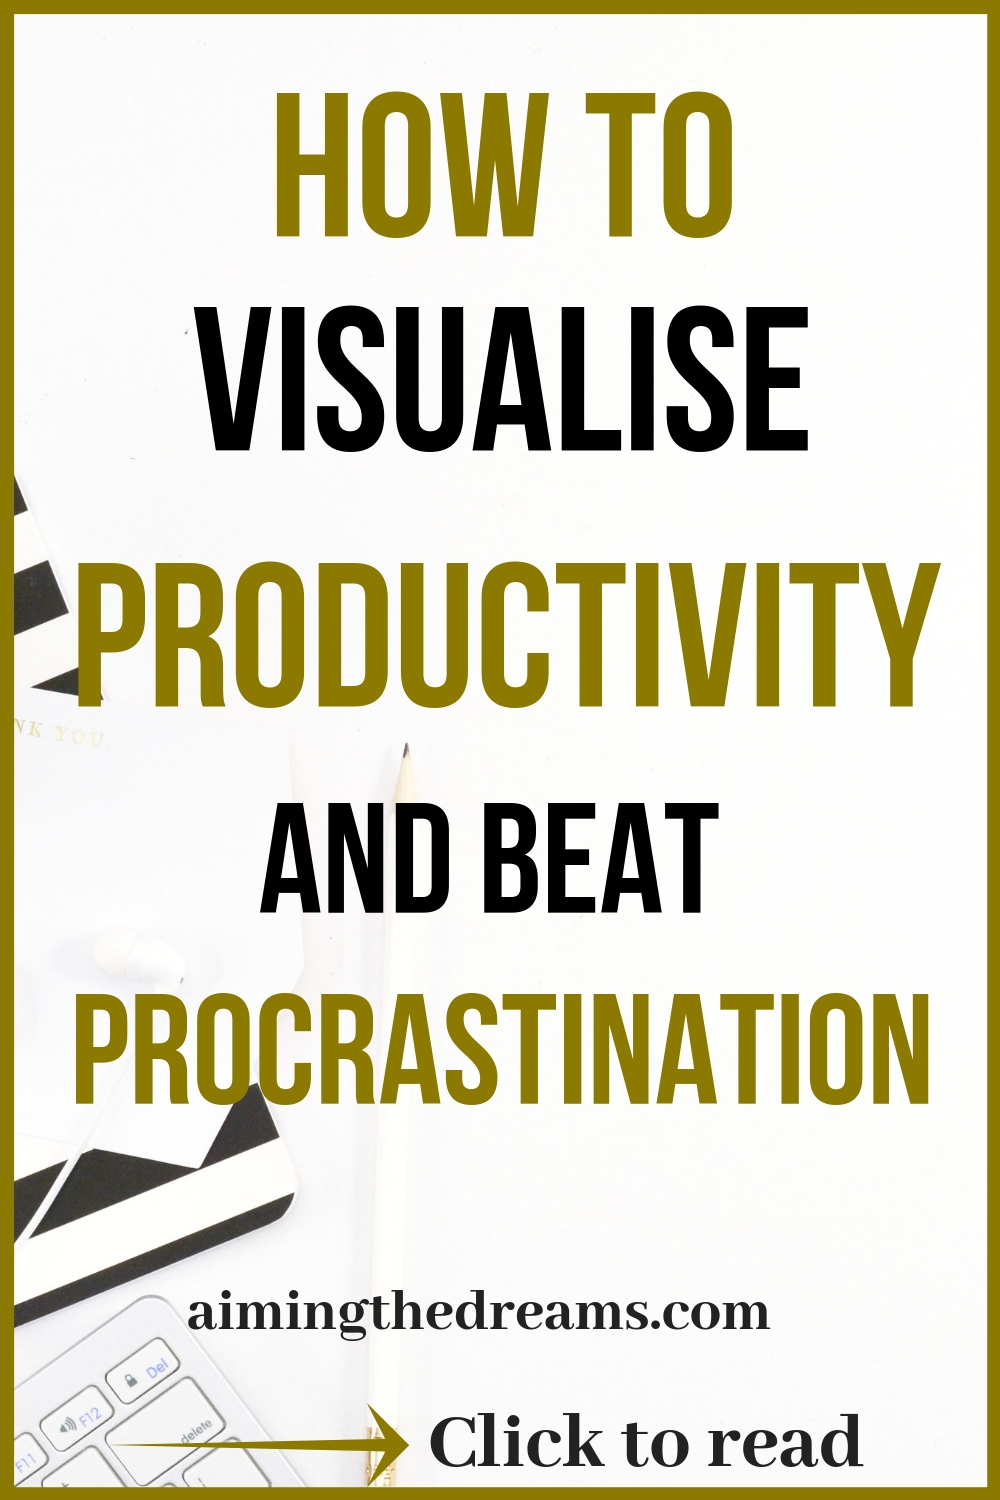 how to visualise productivity to beat procrastination. click to read